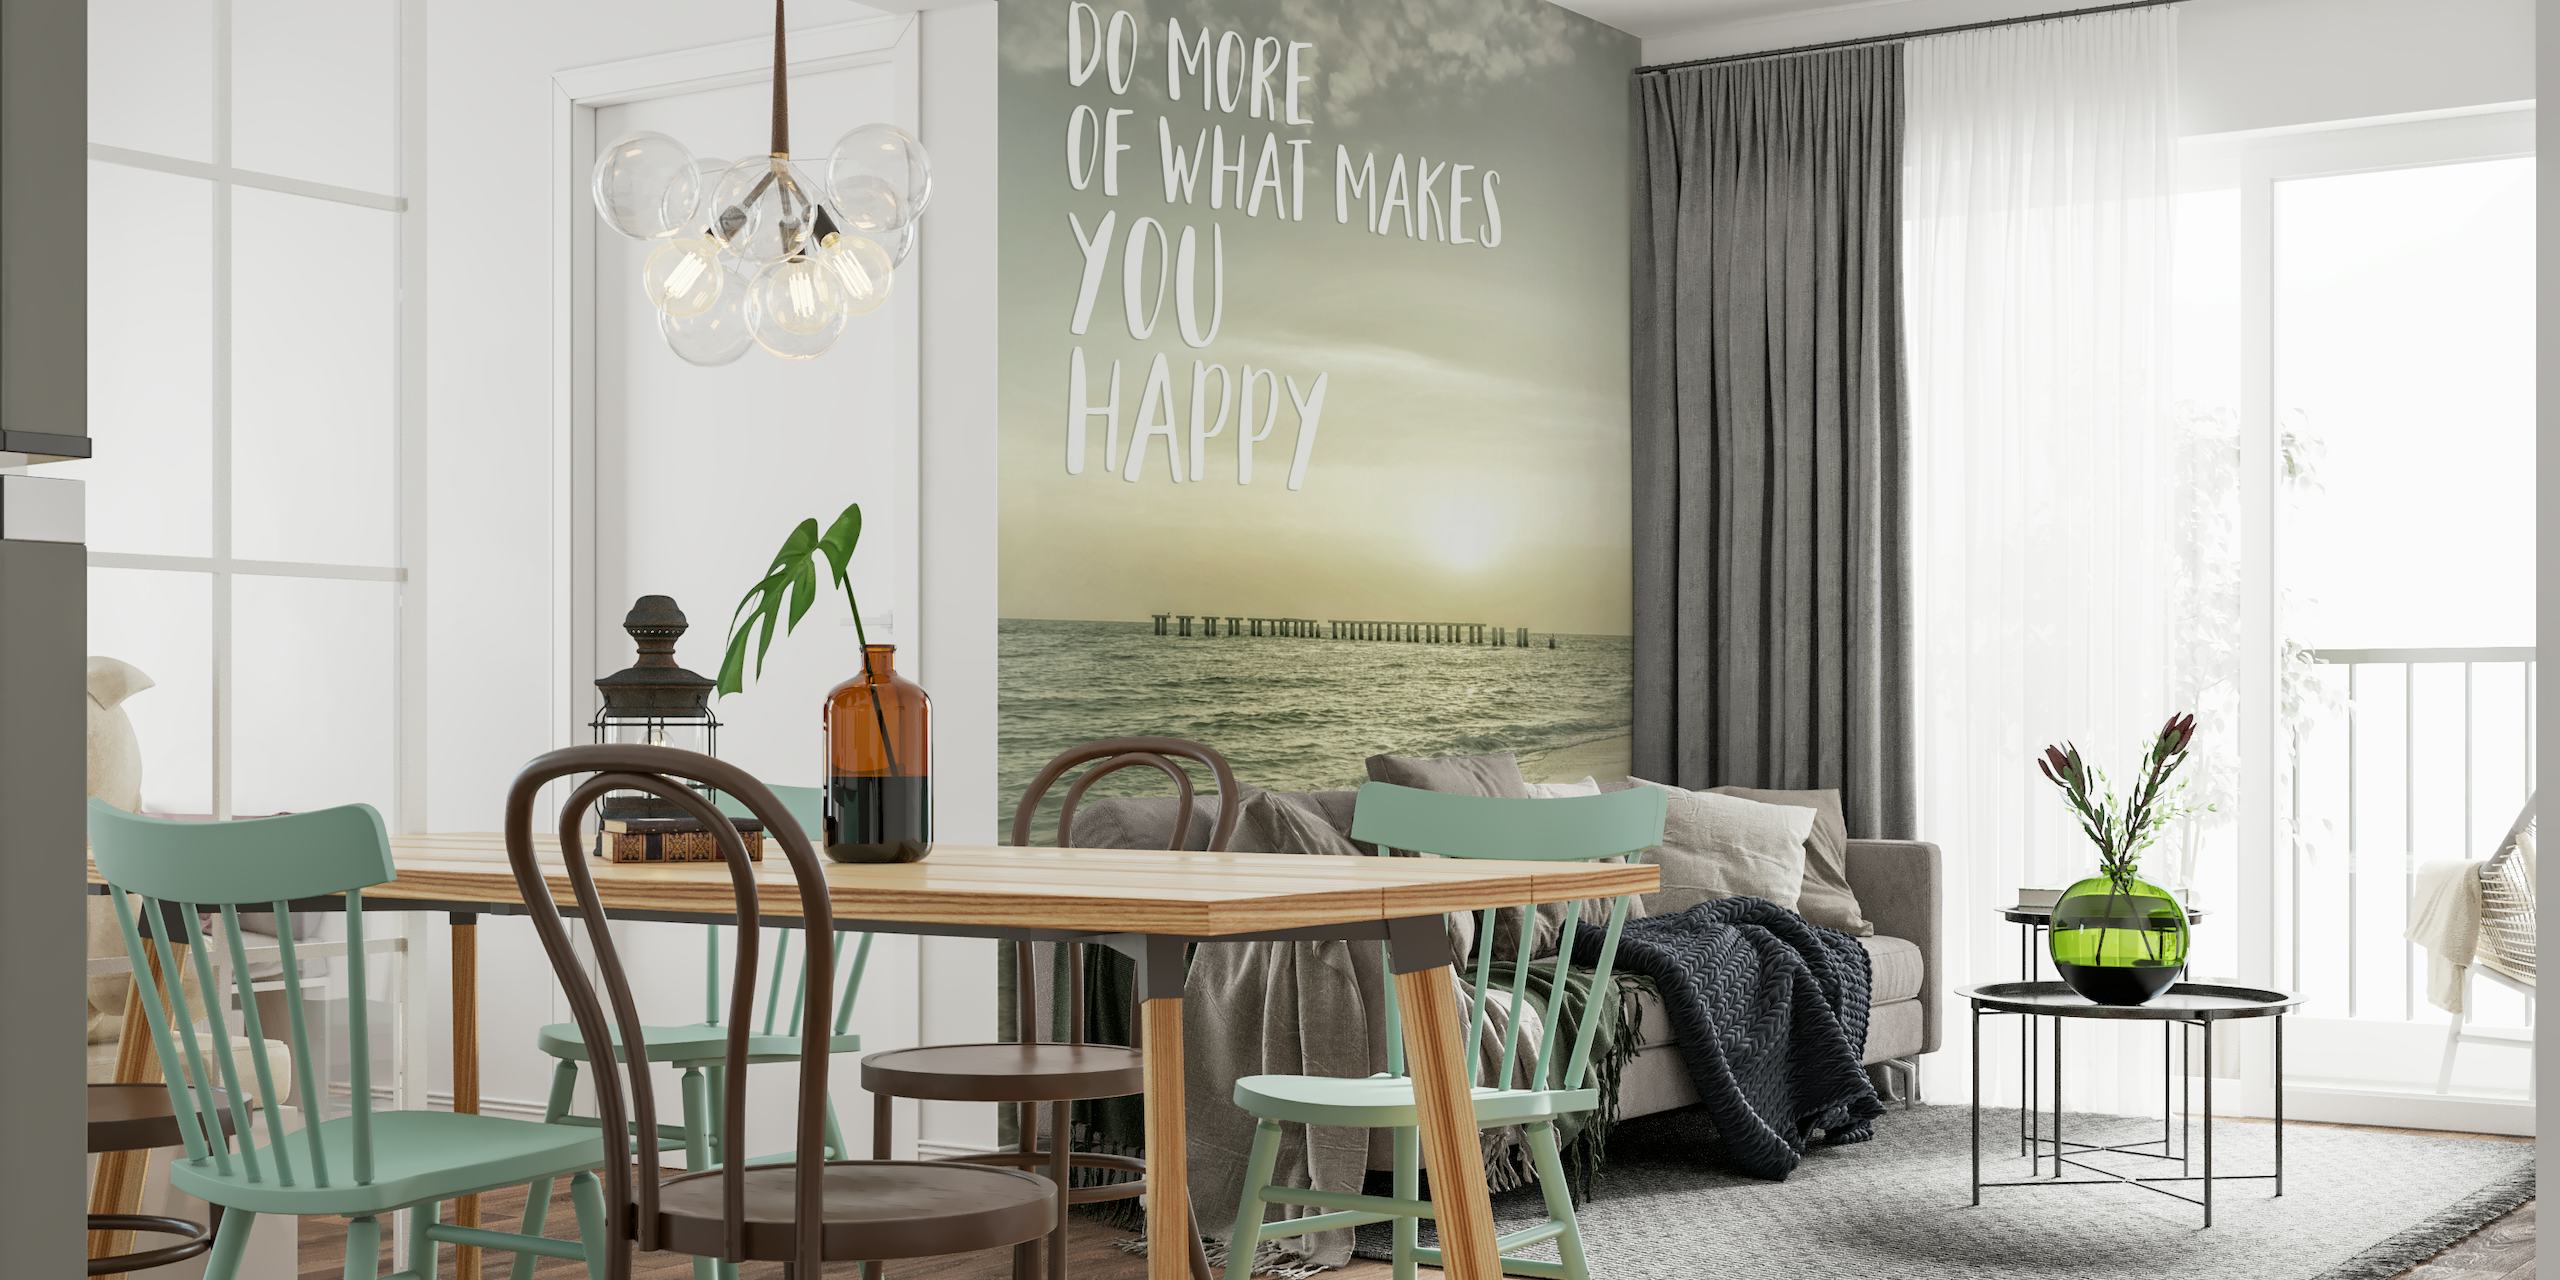 Do more of what makes you happy | Sunset tapeta